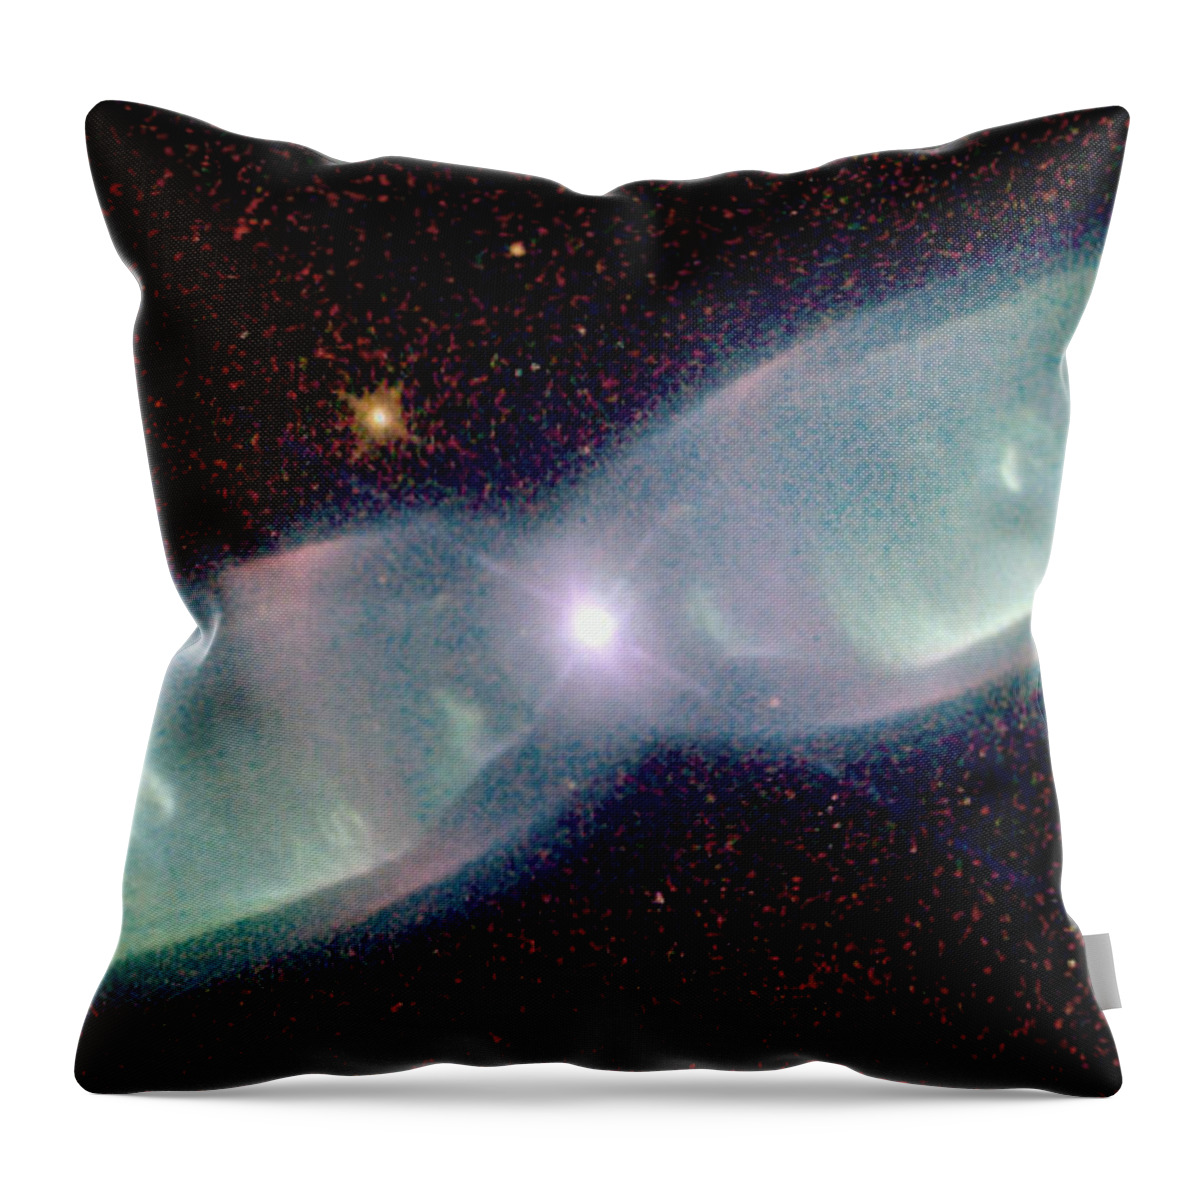 Supersonic Throw Pillow featuring the photograph Supersonic Exhaust From Nebula by STScI/NASA/Science Source